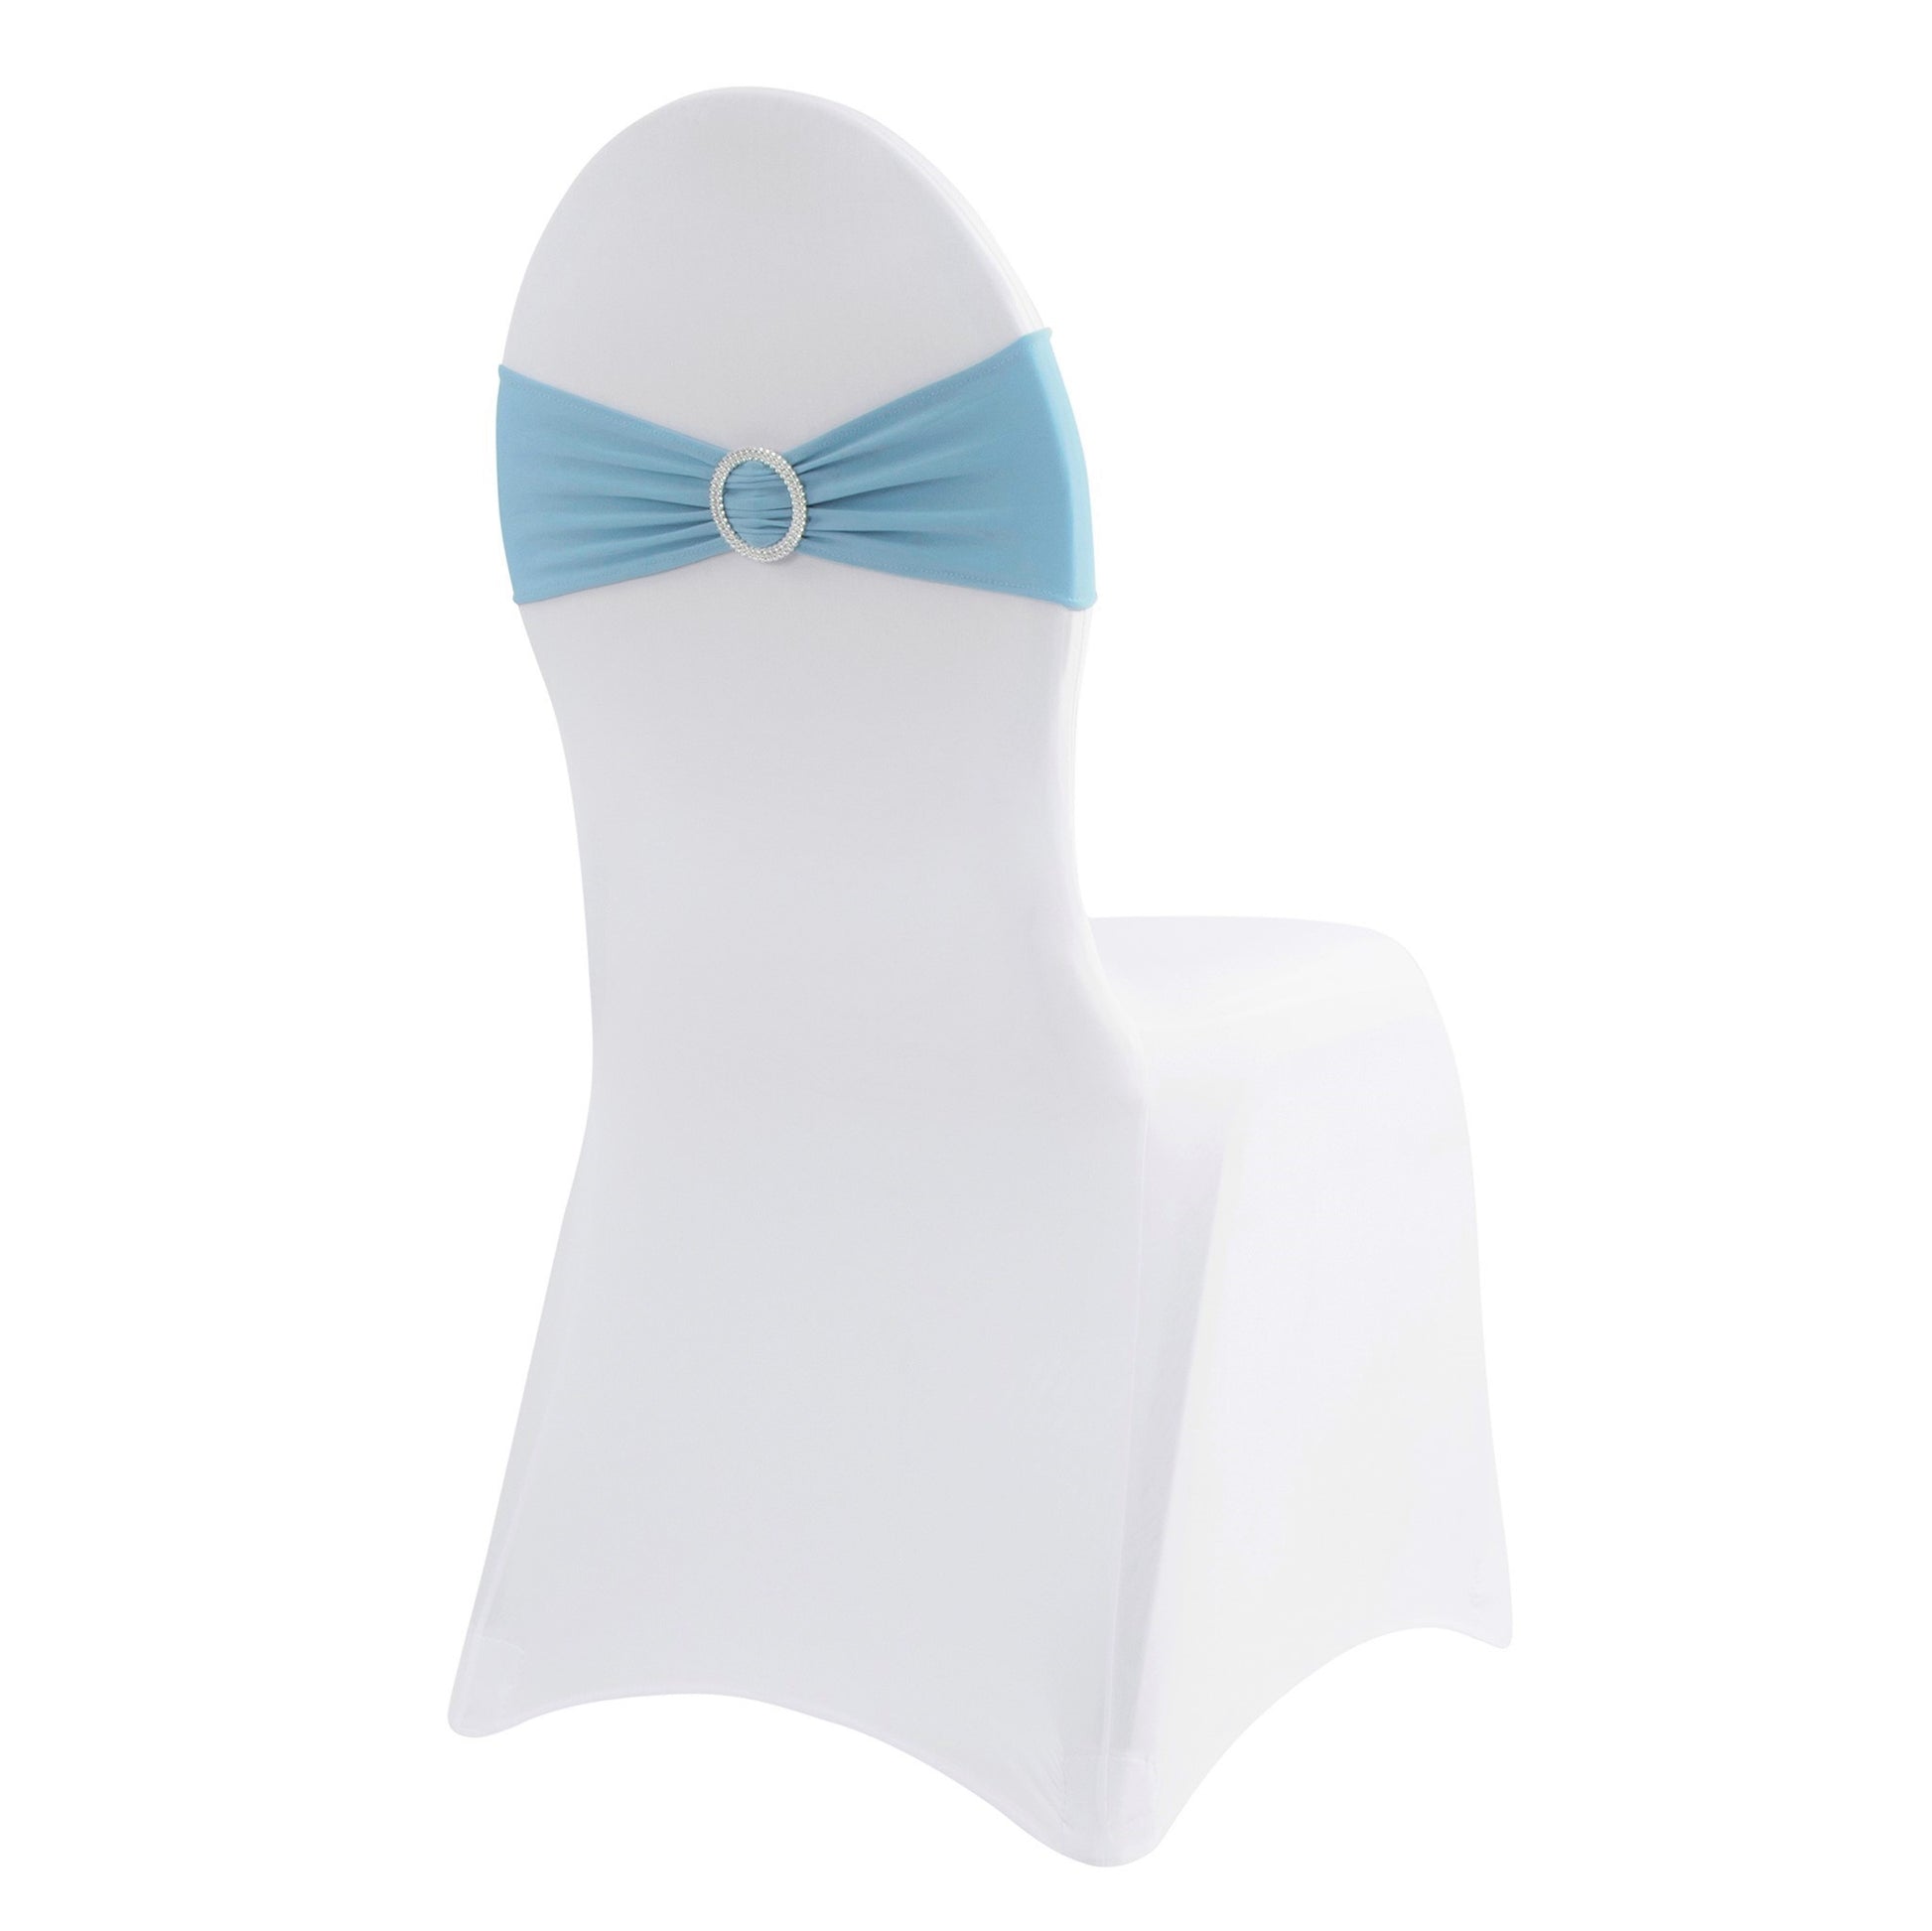 Buckle Spandex Stretch Chair Band - Baby Blue